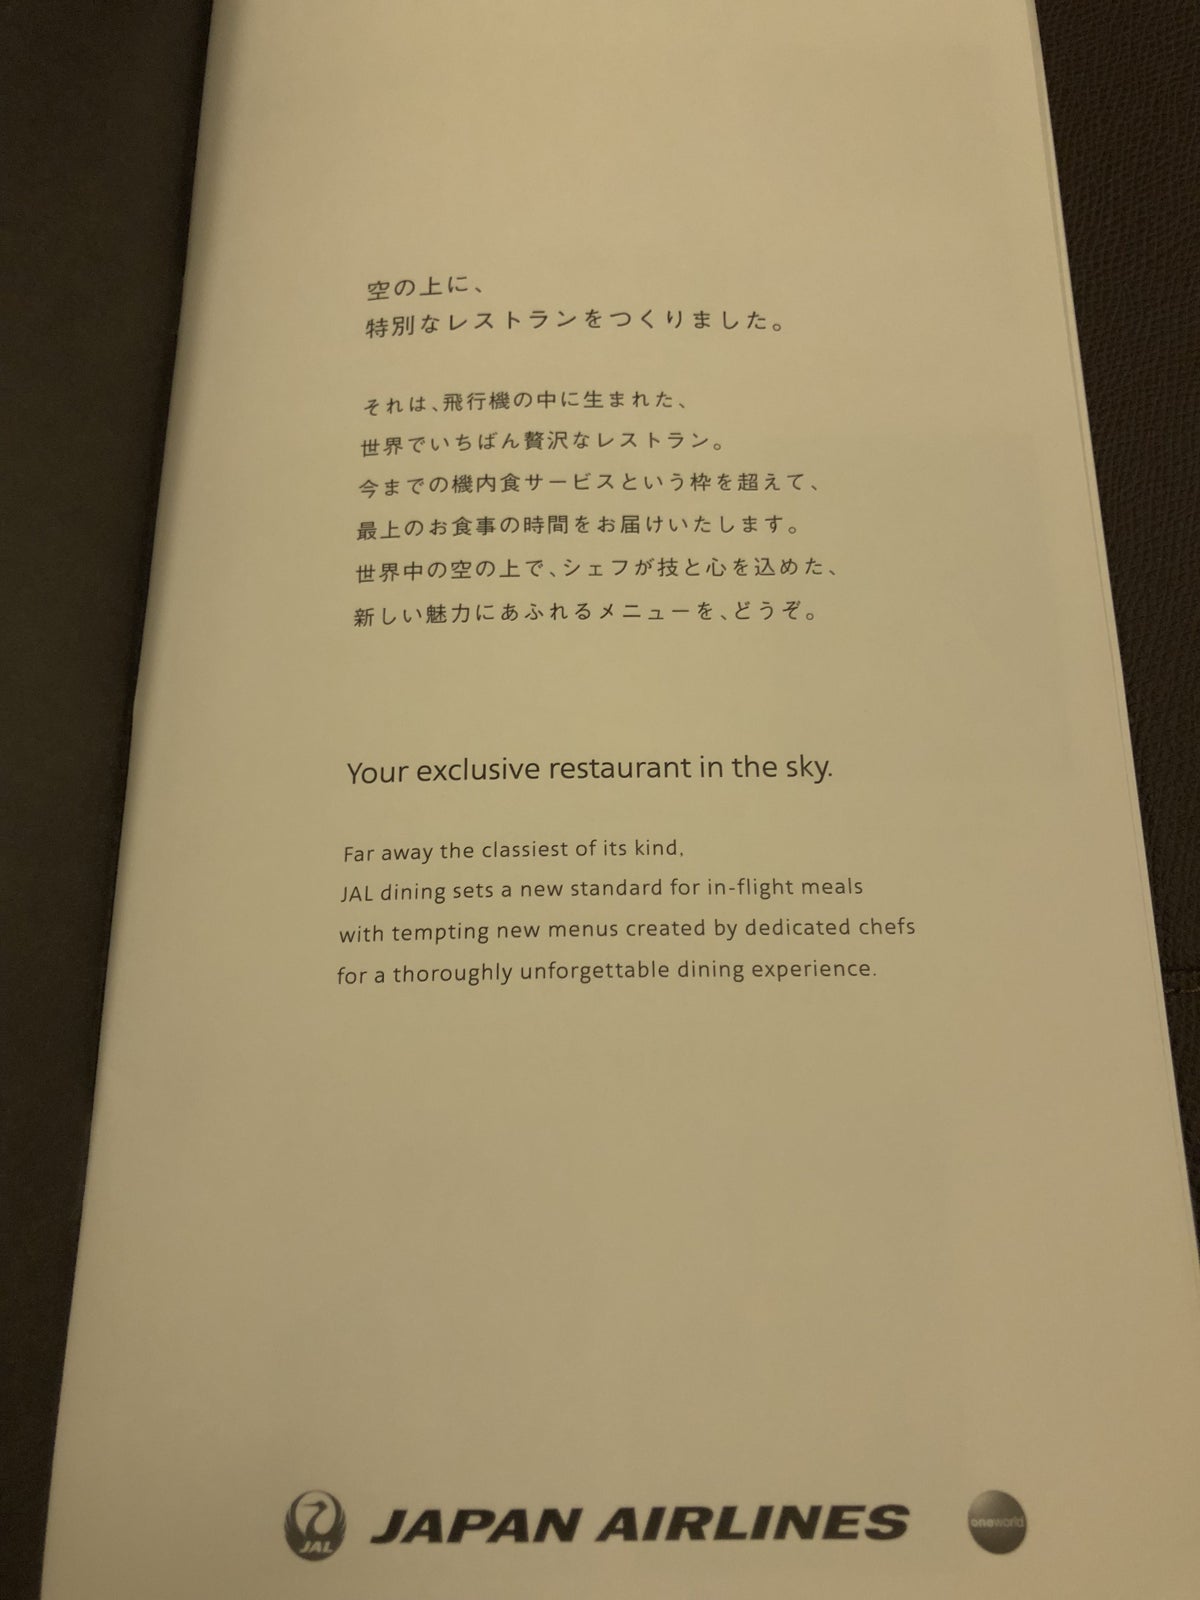 Japan Airlines 777 First Class Food & Beverage Menu Introduction